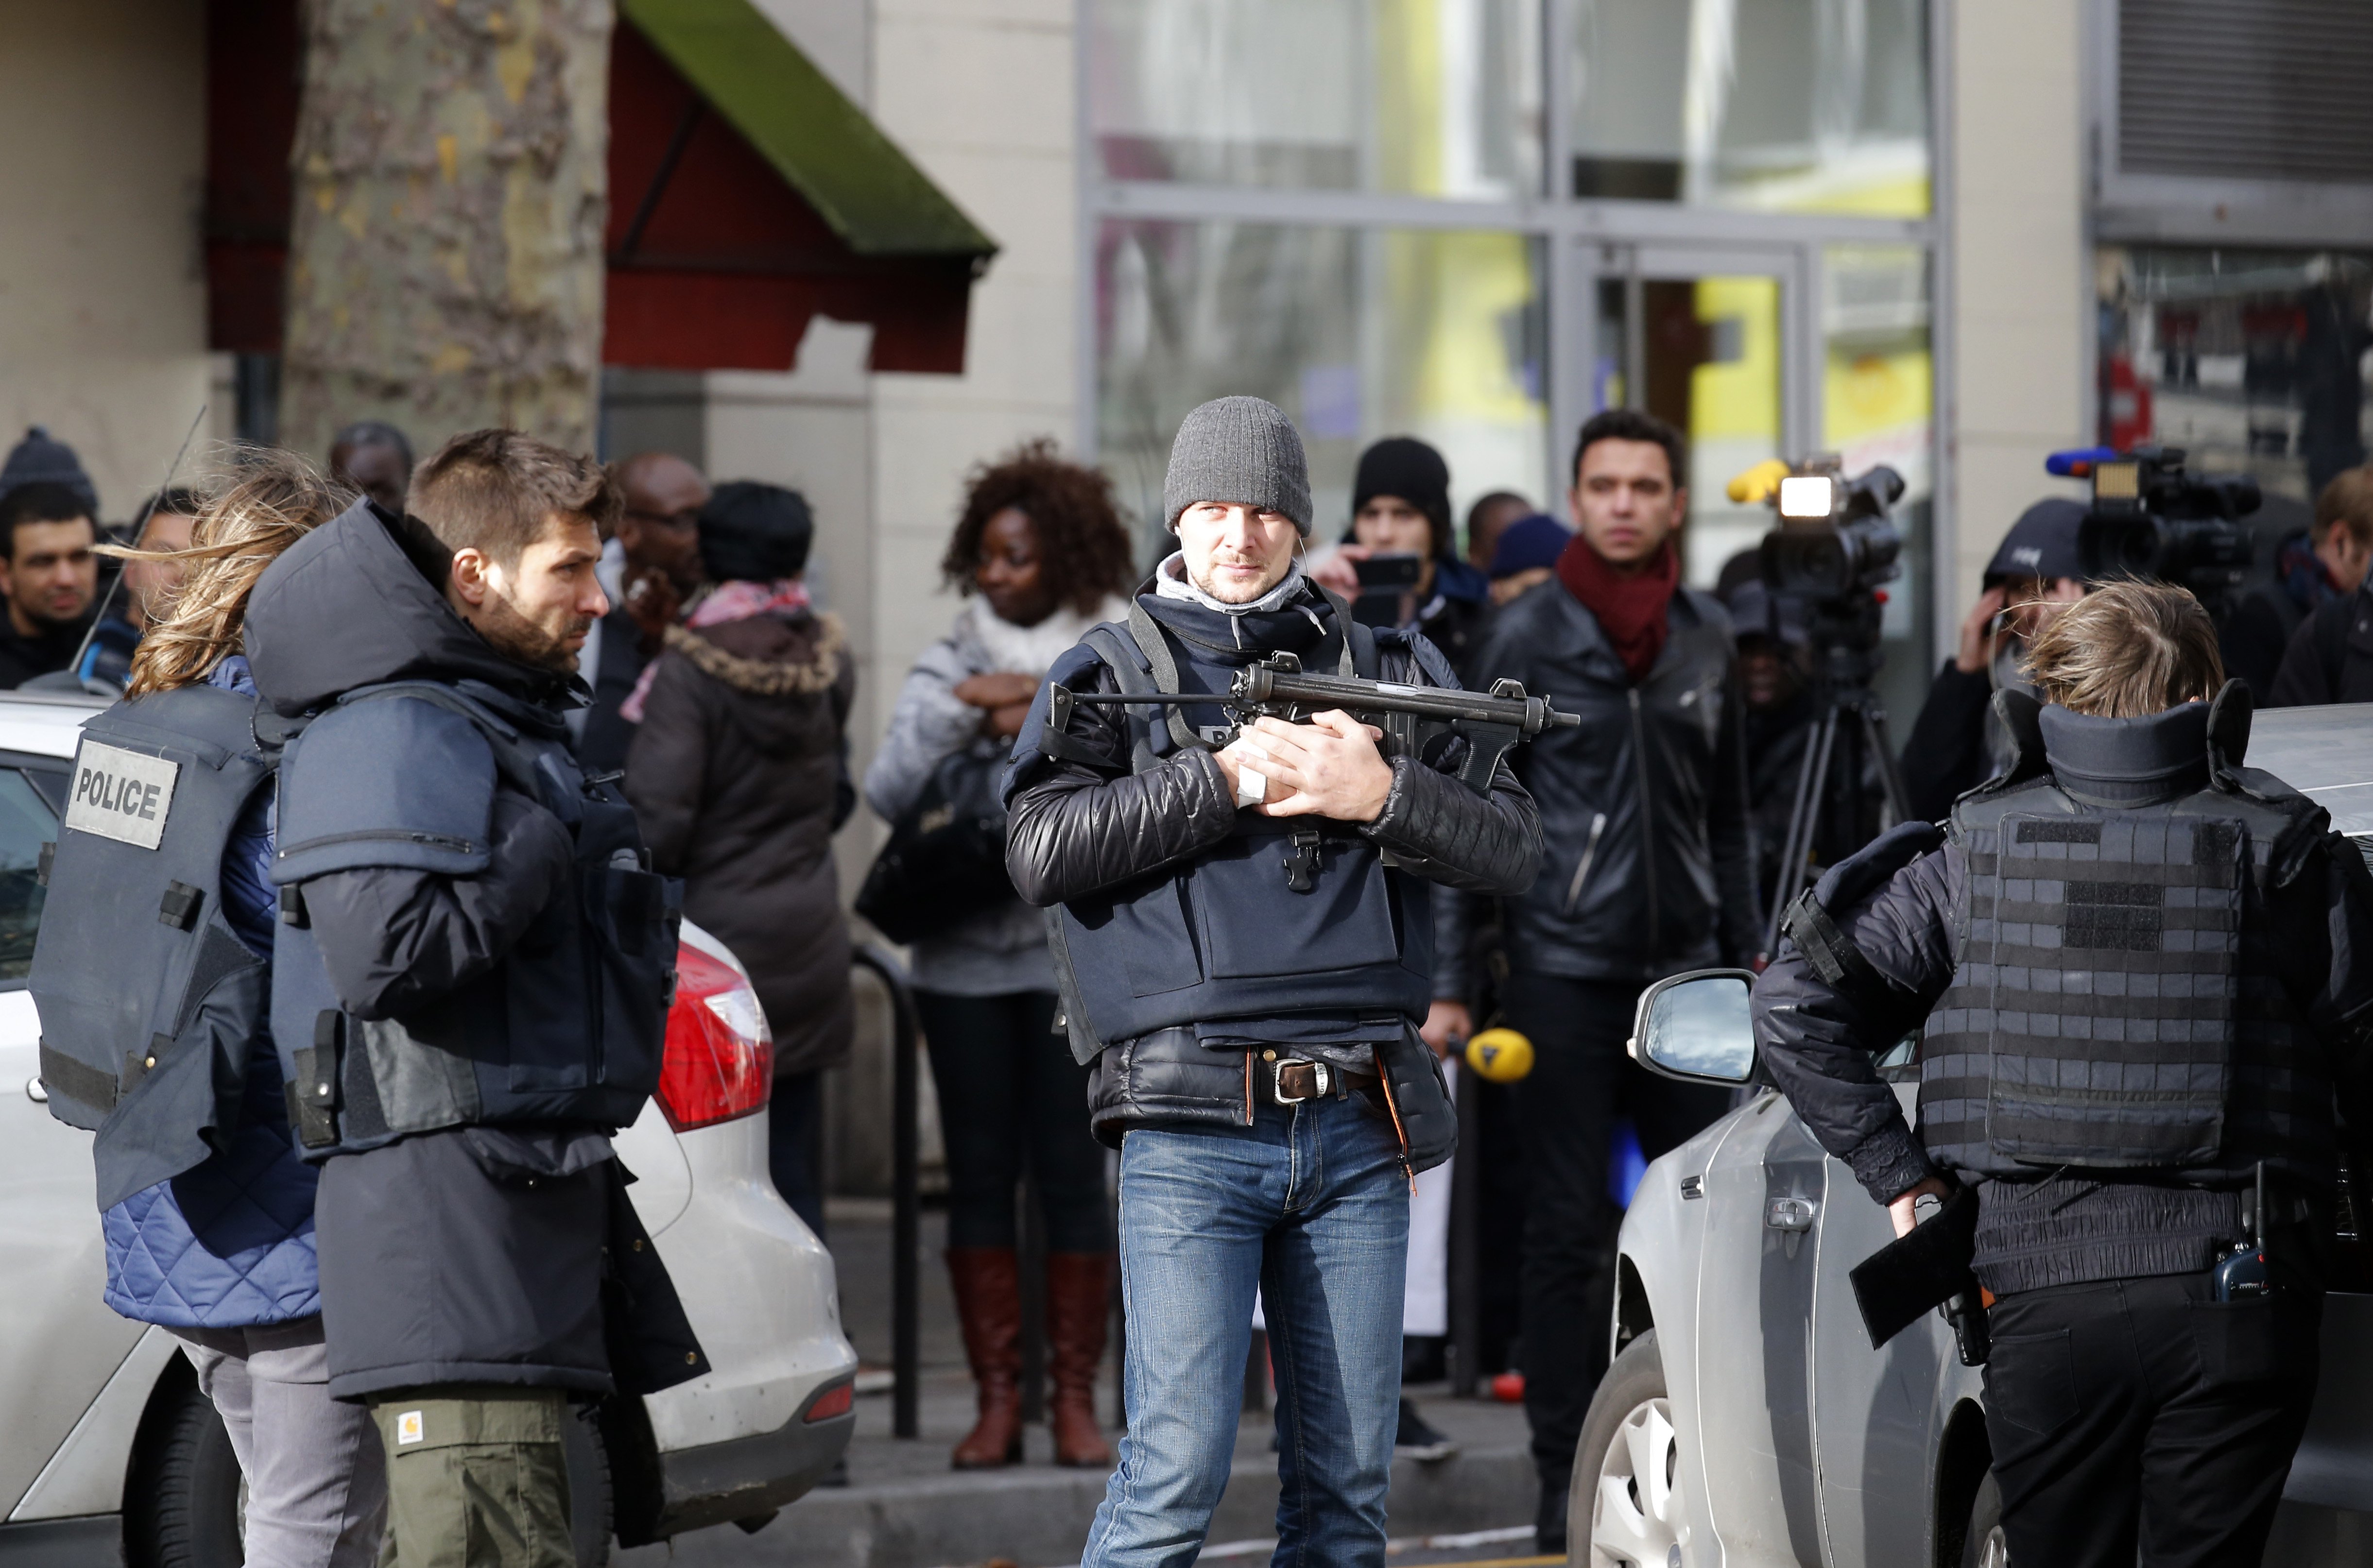 Police officers secure the area after a fatal shooting took place at a police station in Paris, Thursday, Jan. 7, 2016. Officers shot and killed a knife-wielding man wearing a fake explosive vest at a police station in northern Paris on Thursday, French officials said, a year to the day after an attack on the French satirical newspaper Charlie Hebdo launched a bloody year in the French capital. (AP Photo/Michel Euler)